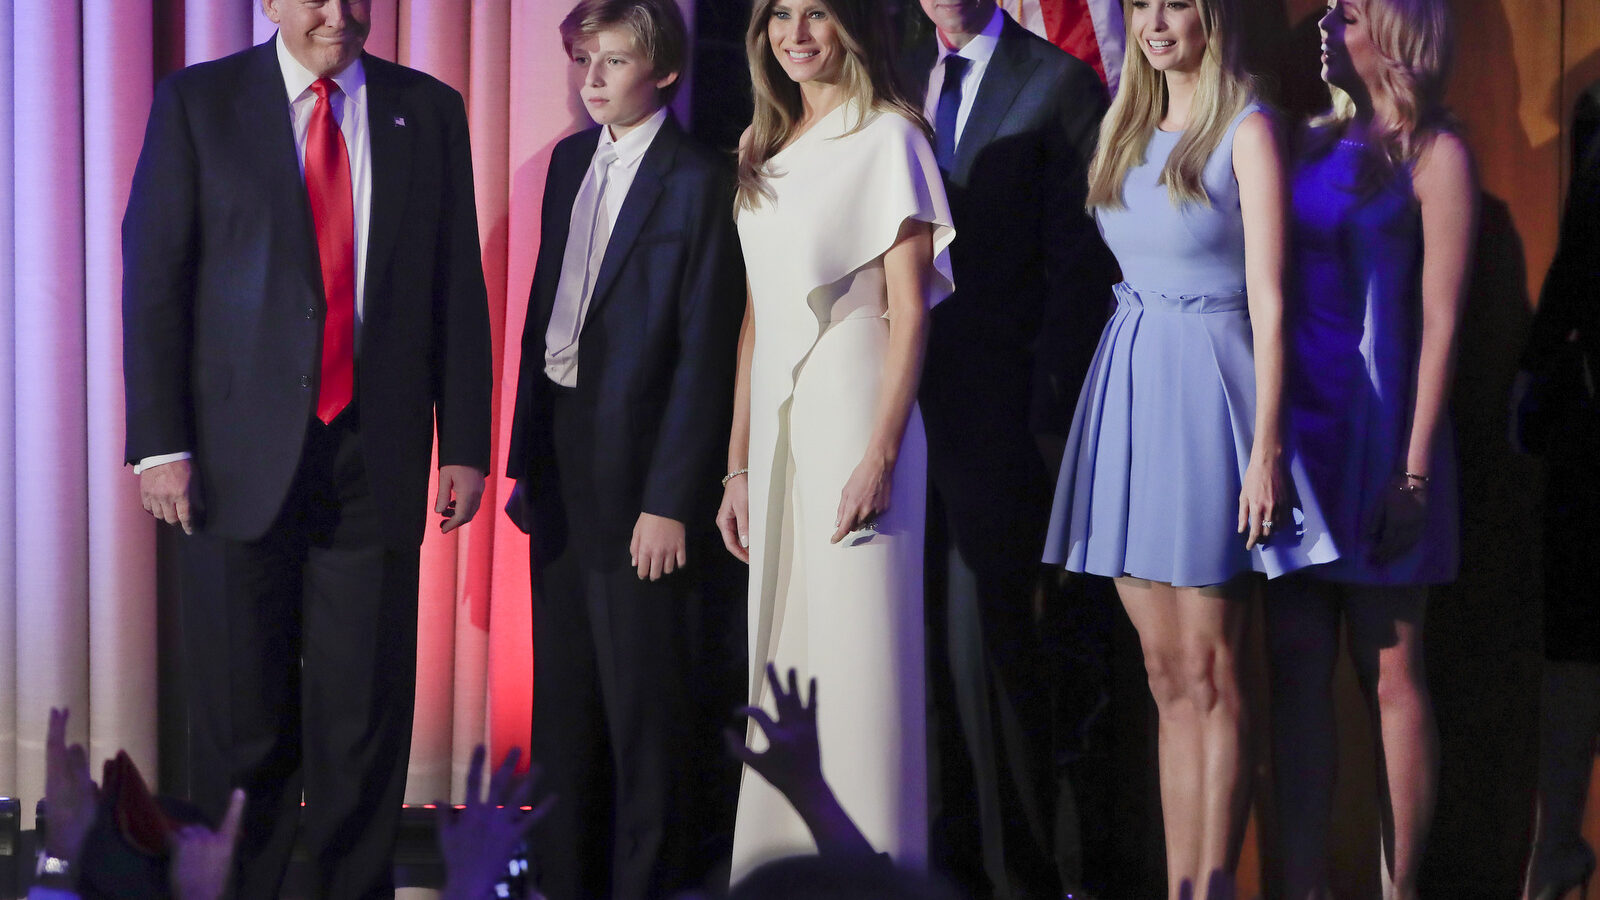 President elect Donald Trump, left, arrives with his family to give his acceptance speech at an election night rally, Wednesday, Nov. 9, 2016, in New York. (AP Photo/Julie Jacobson)